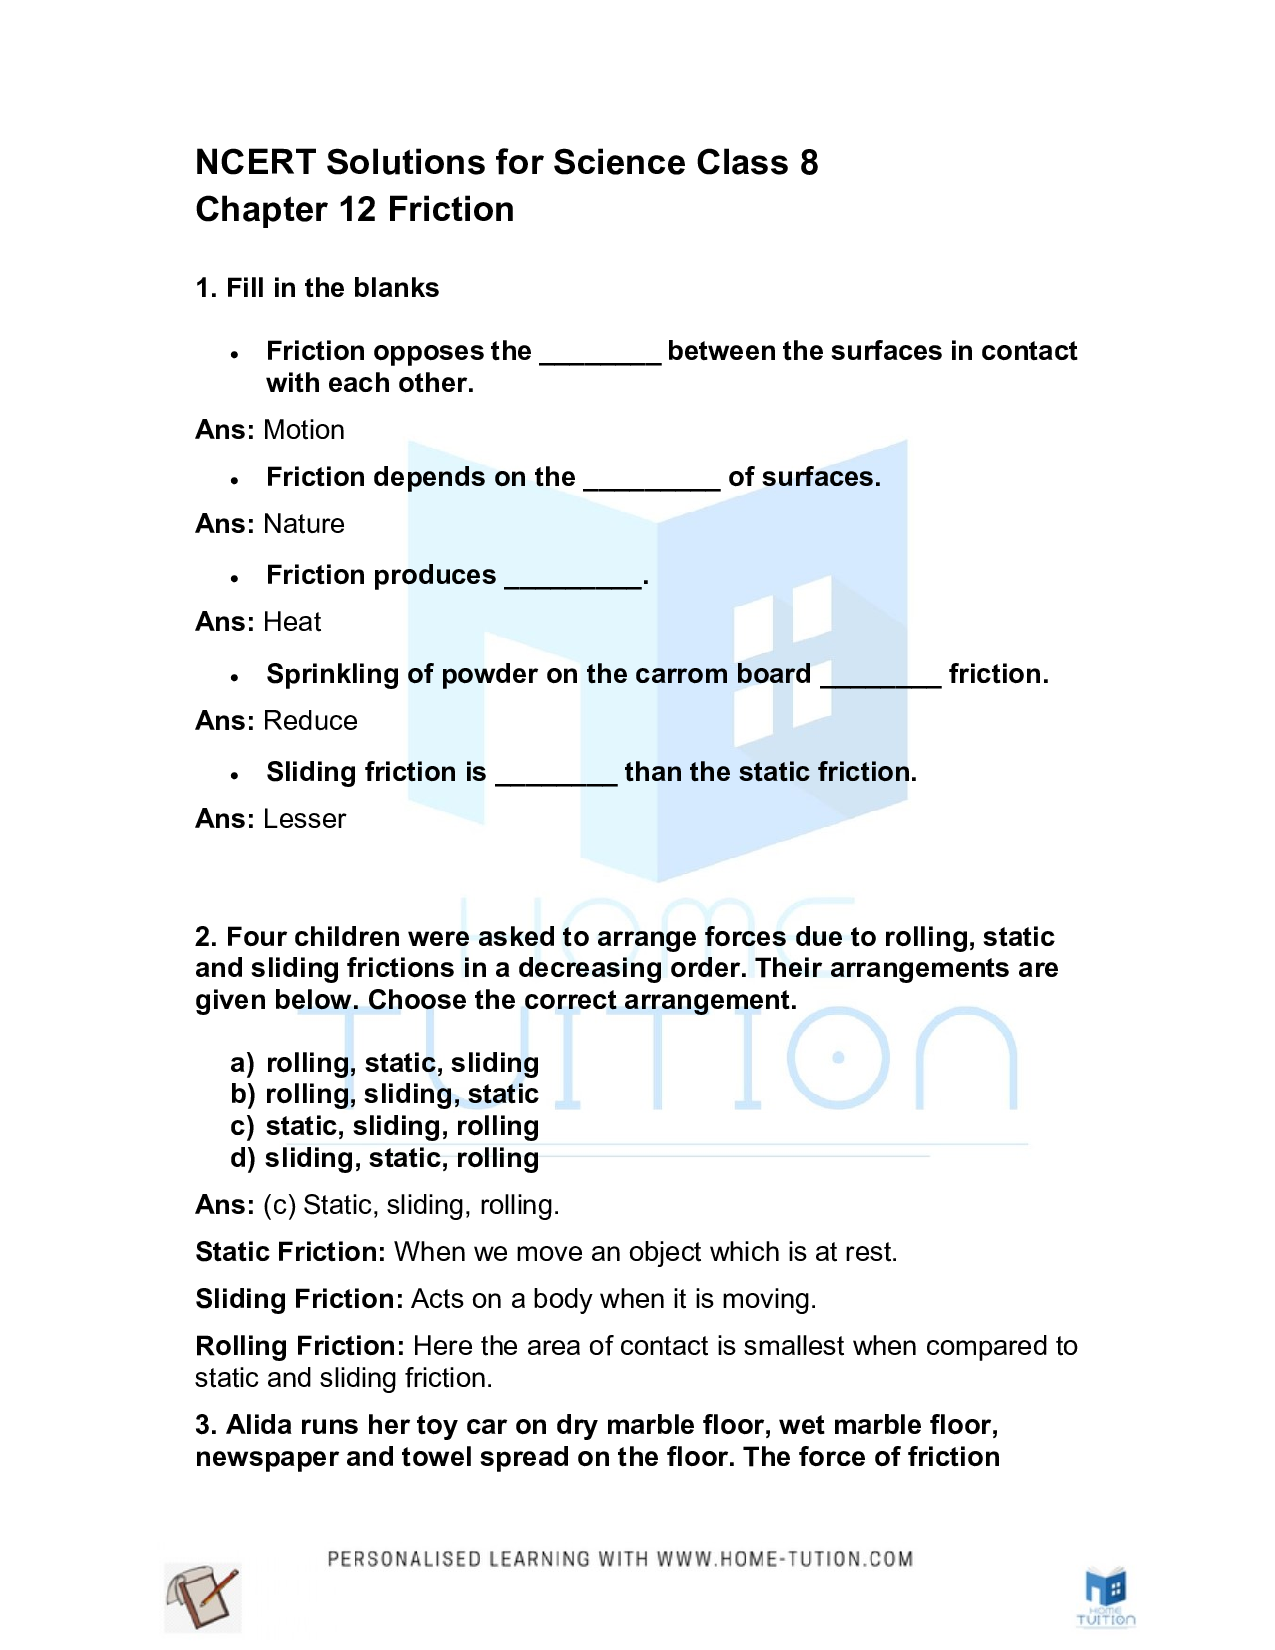 class 8 science chapter 12 case study questions